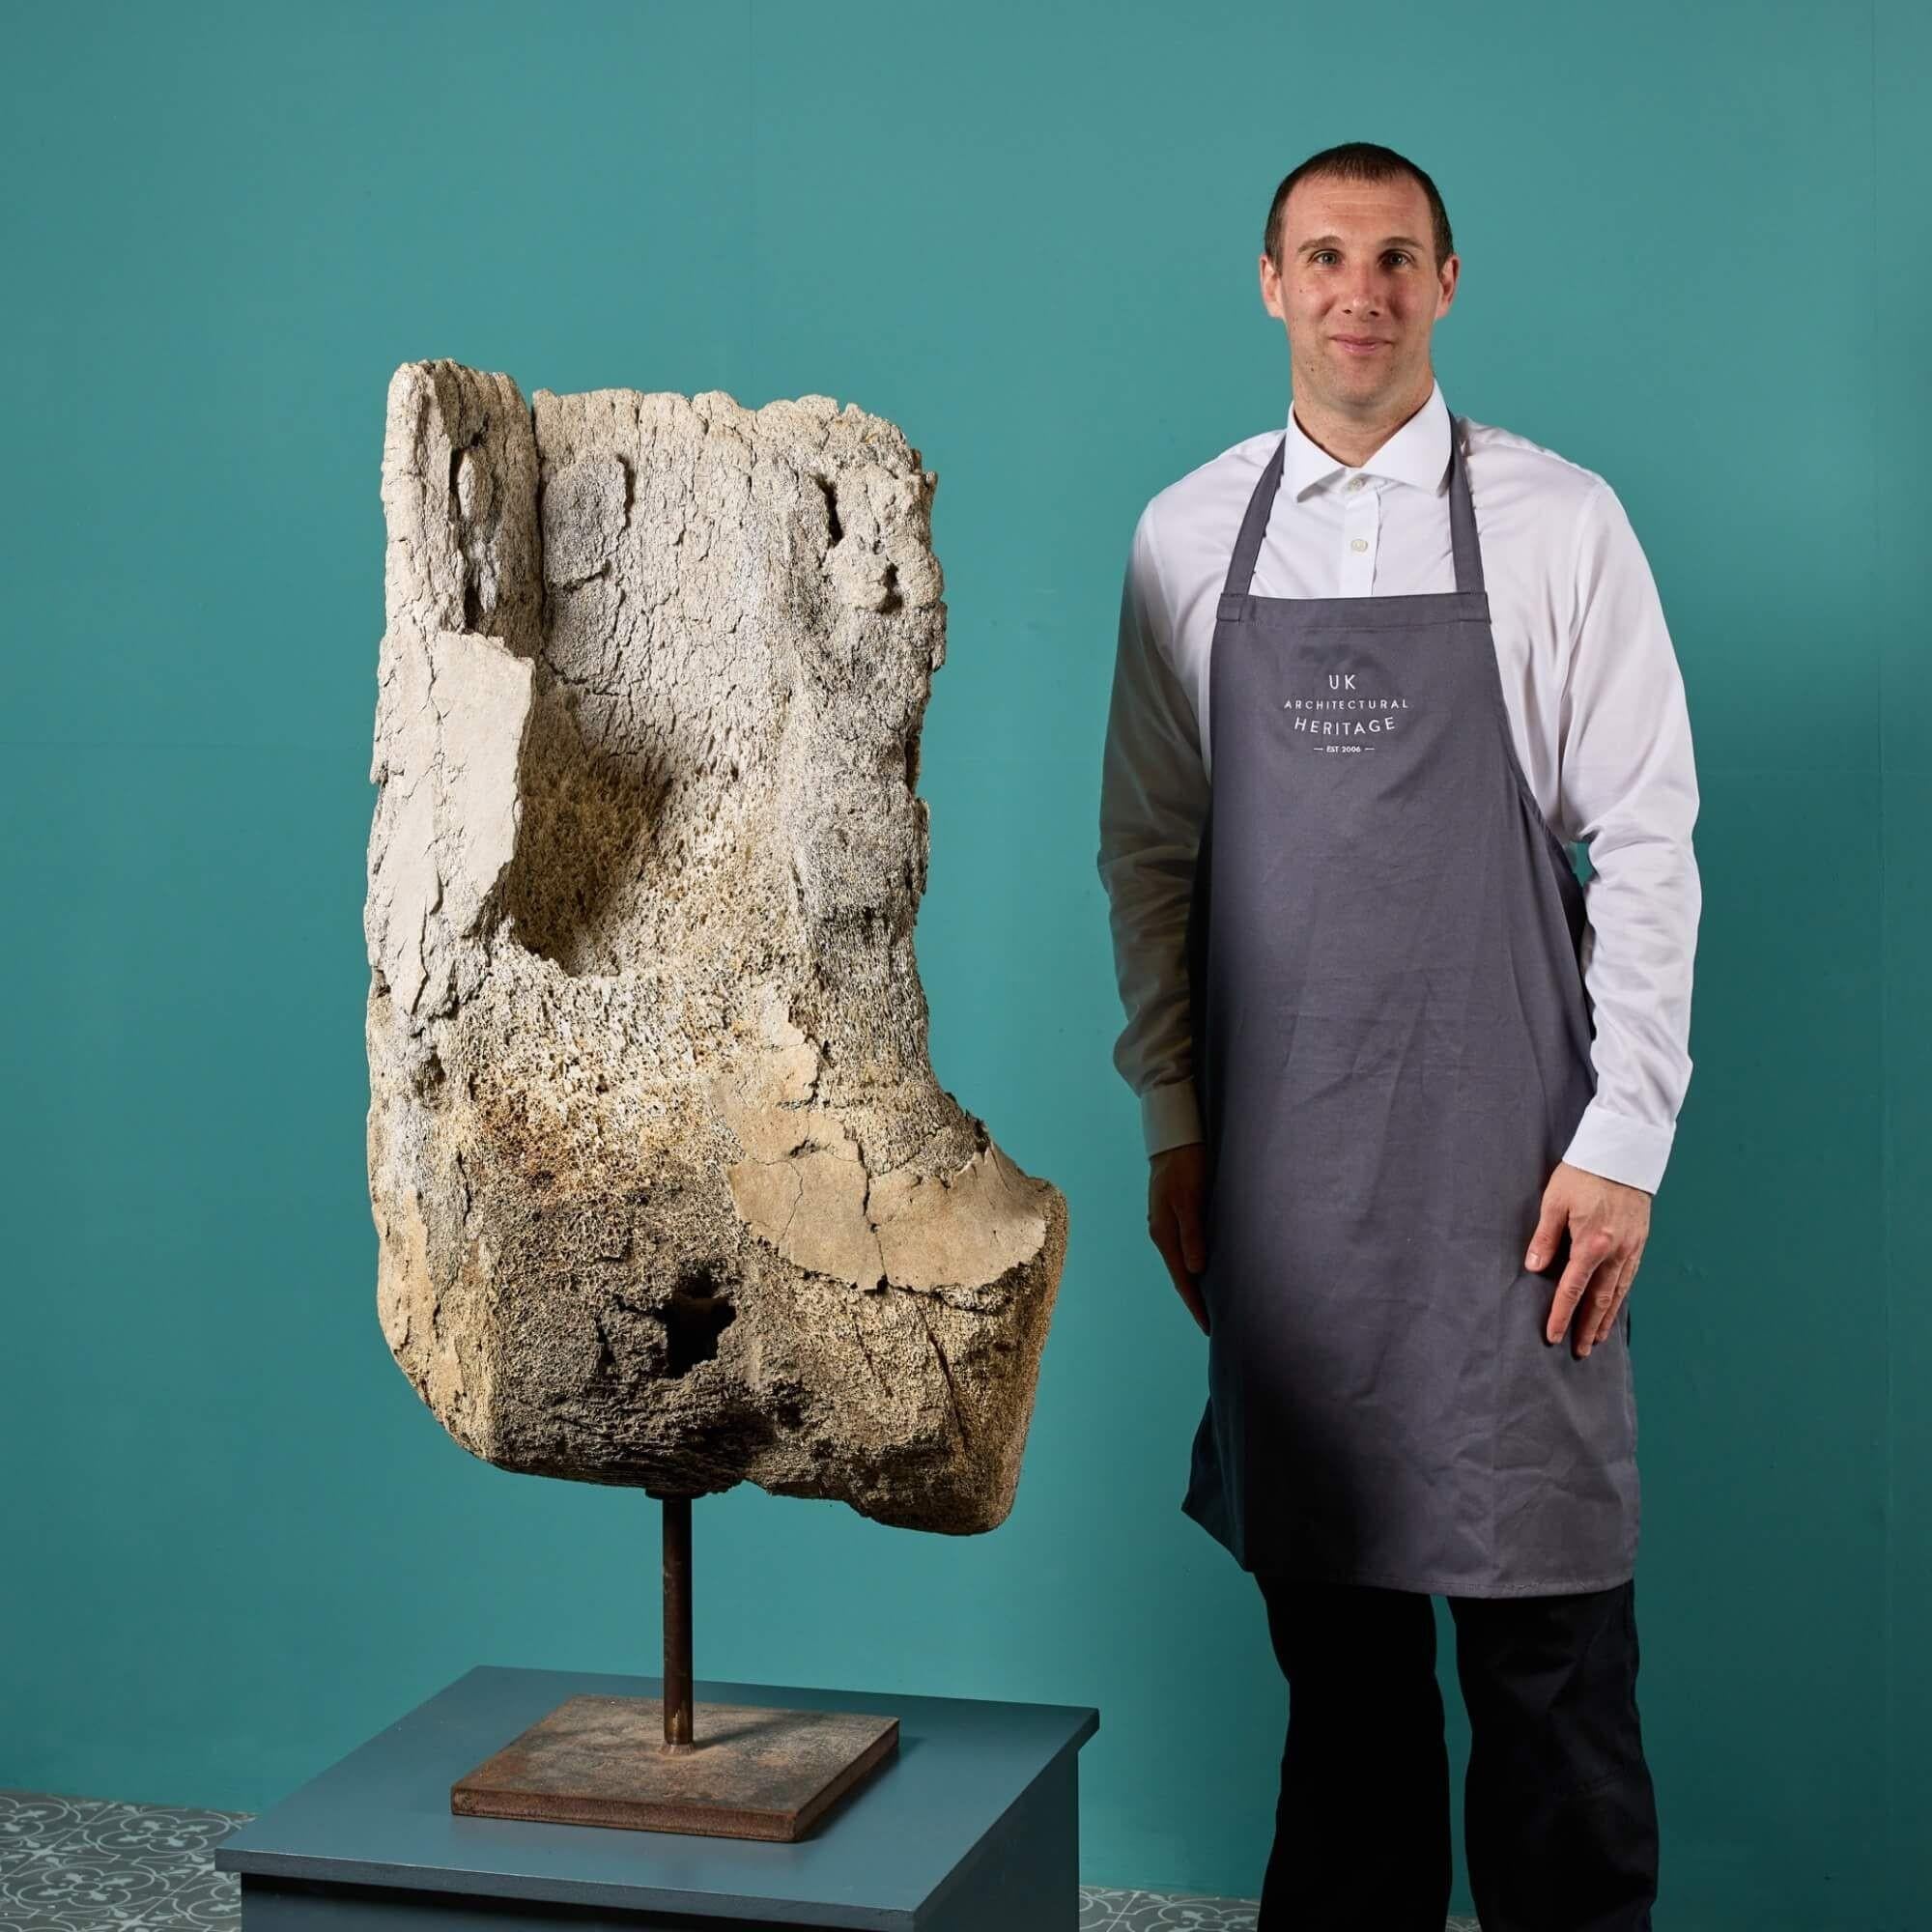 Standing at over 120cm (47 inches) tall, this rare prehistoric fossilised whale bone is a fascinating sculptural artefact for an interior or live-in museum. It was reputedly excavated in Beccles, Suffolk UK and has a natural shape and open texture